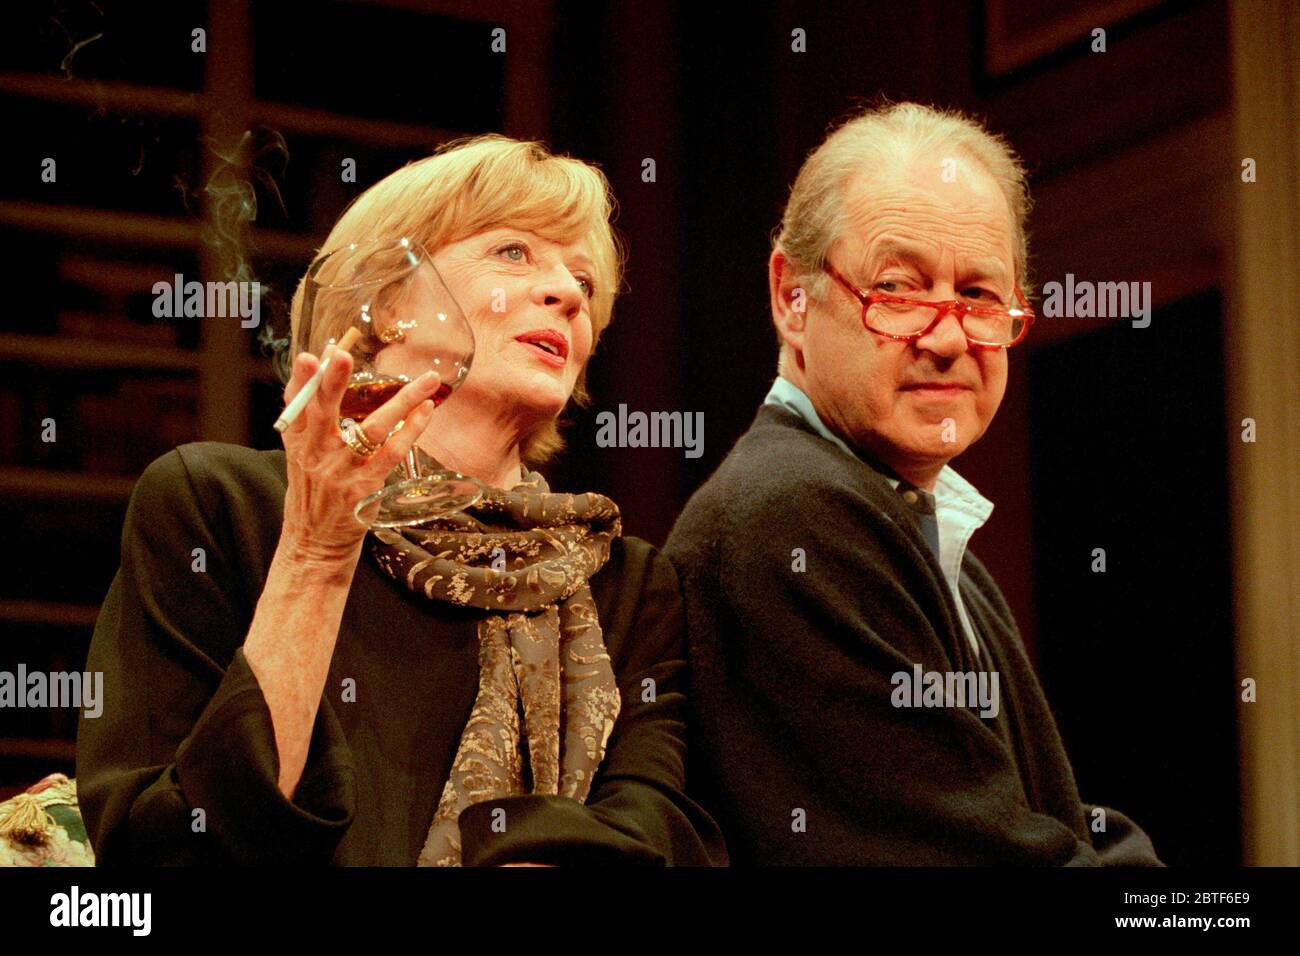 Maggie Smith (Claire), John Standing (Tobias) in  in A DELICATE BALANCE by Edward Albee at the Theatre Royal Haymarket, London SW1   26/10/1997 Stock Photo